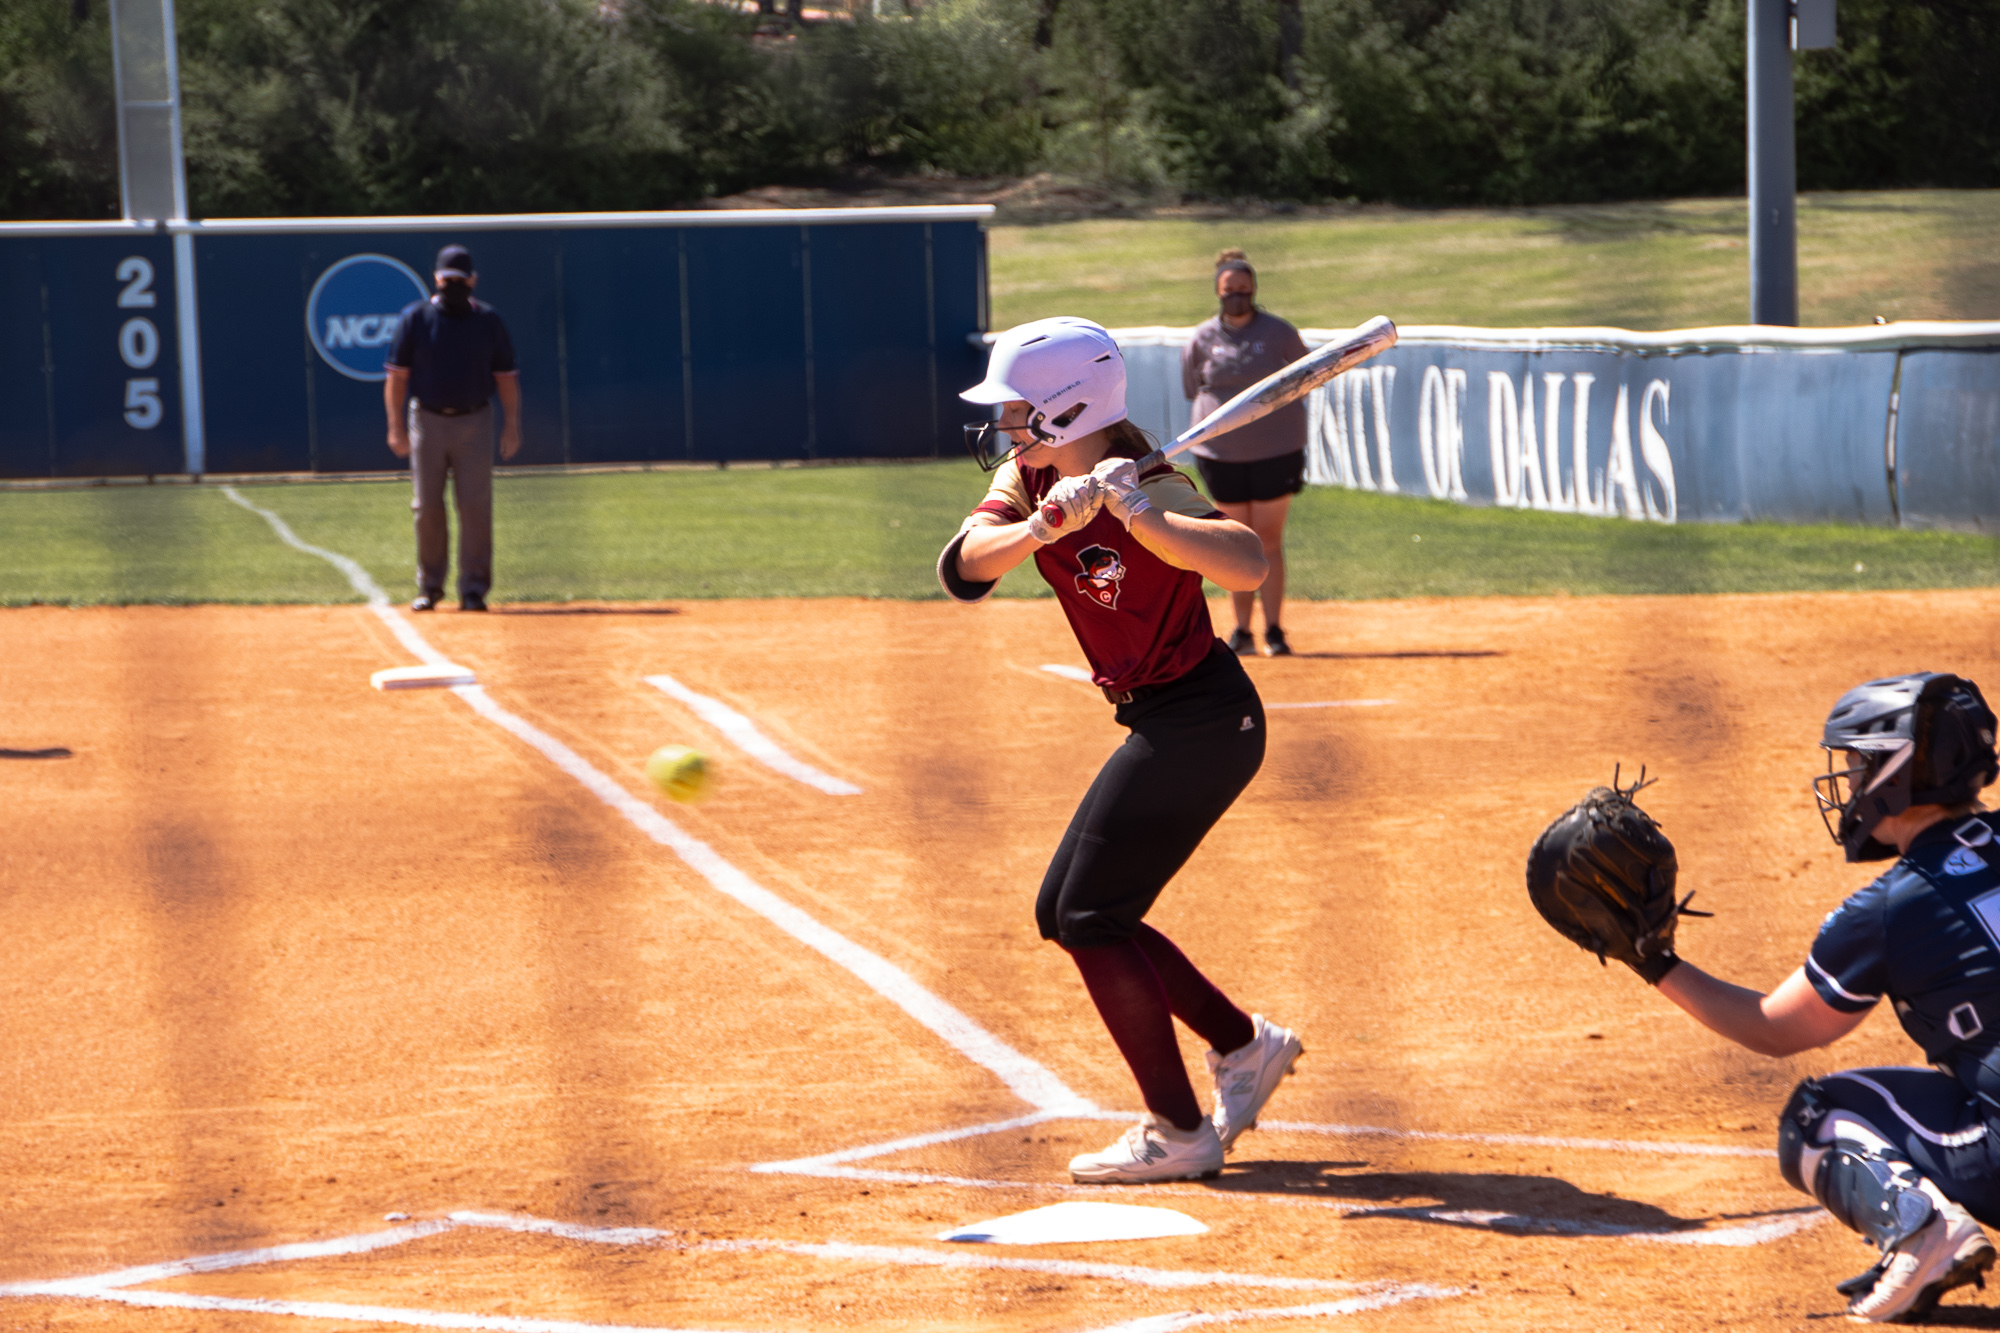 Softball Team To Face Southwestern at Home in Key Weekend Series